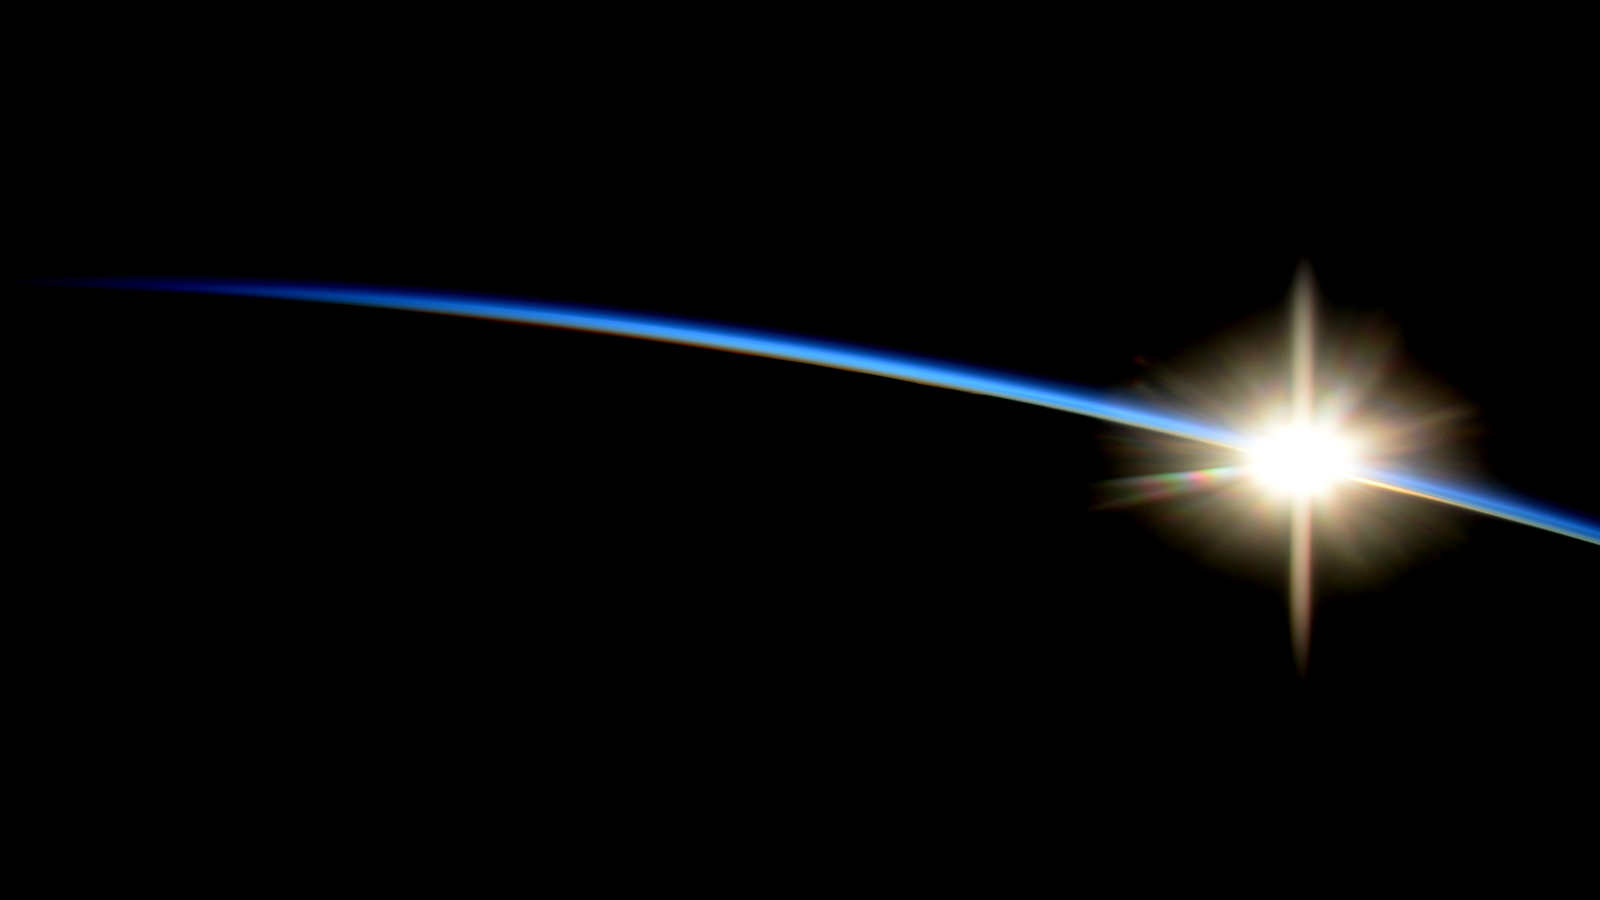 Sunrise from the International Space Station (ISS) on October 29, 2014 (NASA Photo)